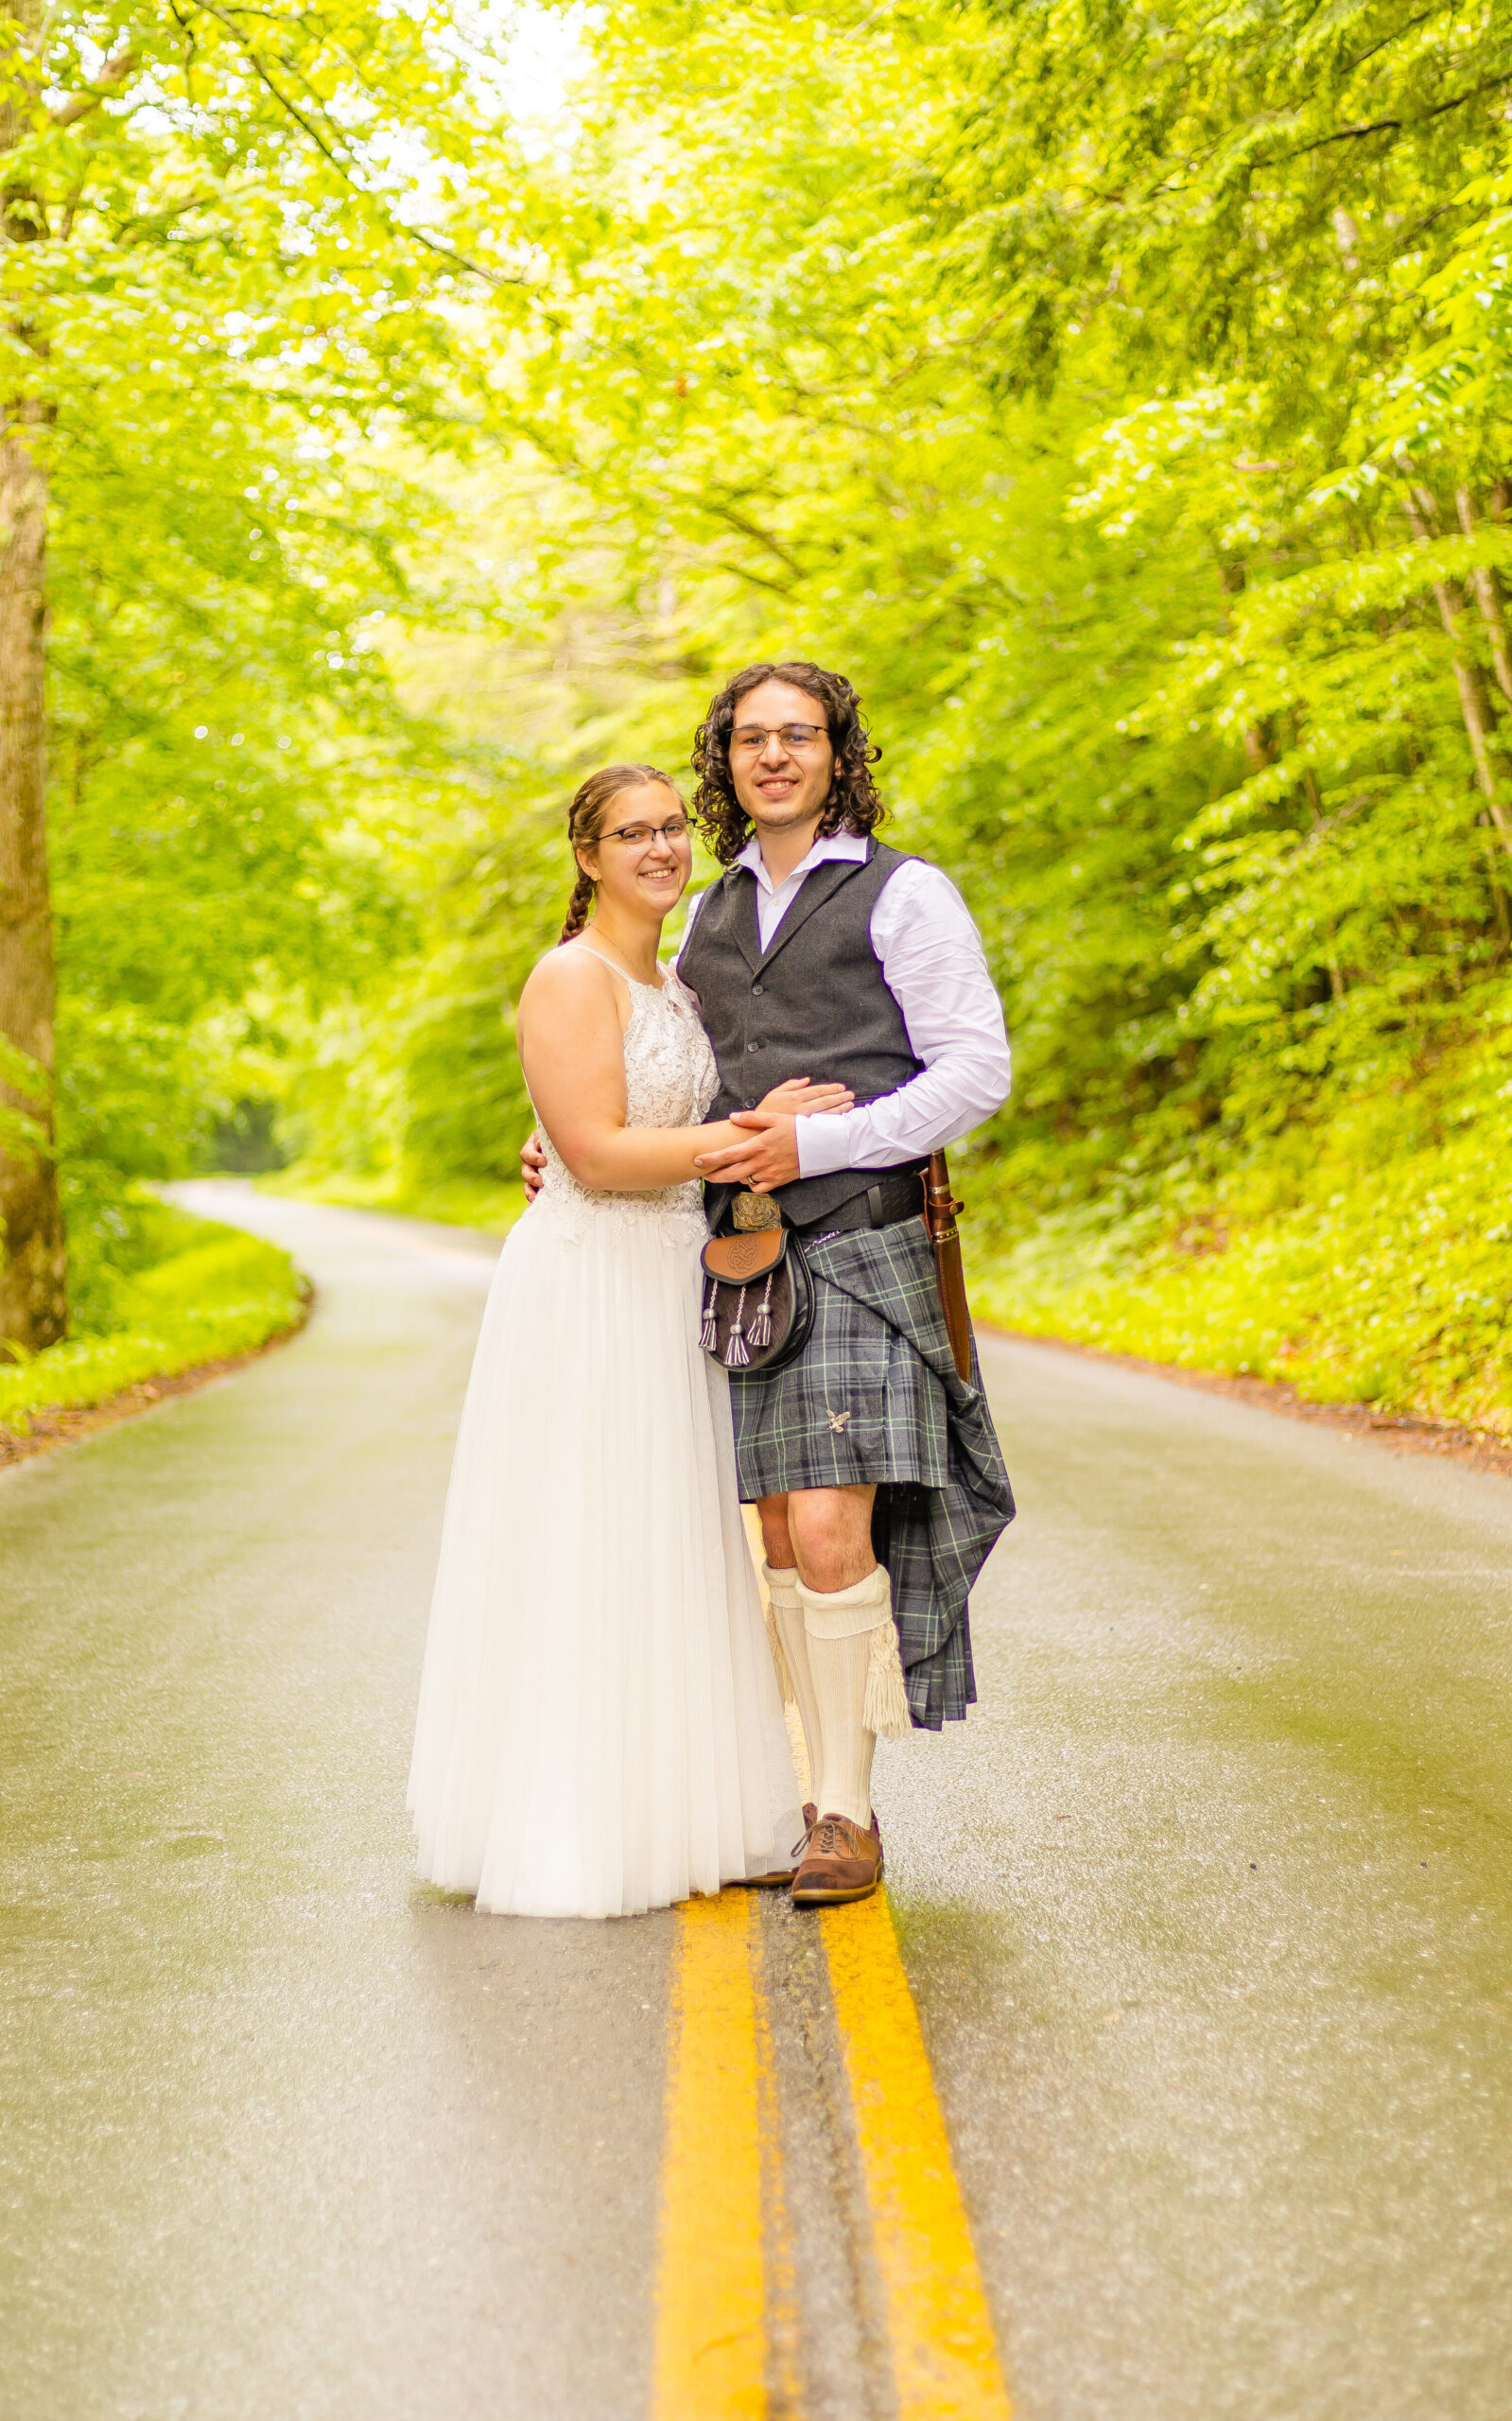 The bride and groom stand on the winding Tripoli road in New Hampshire.